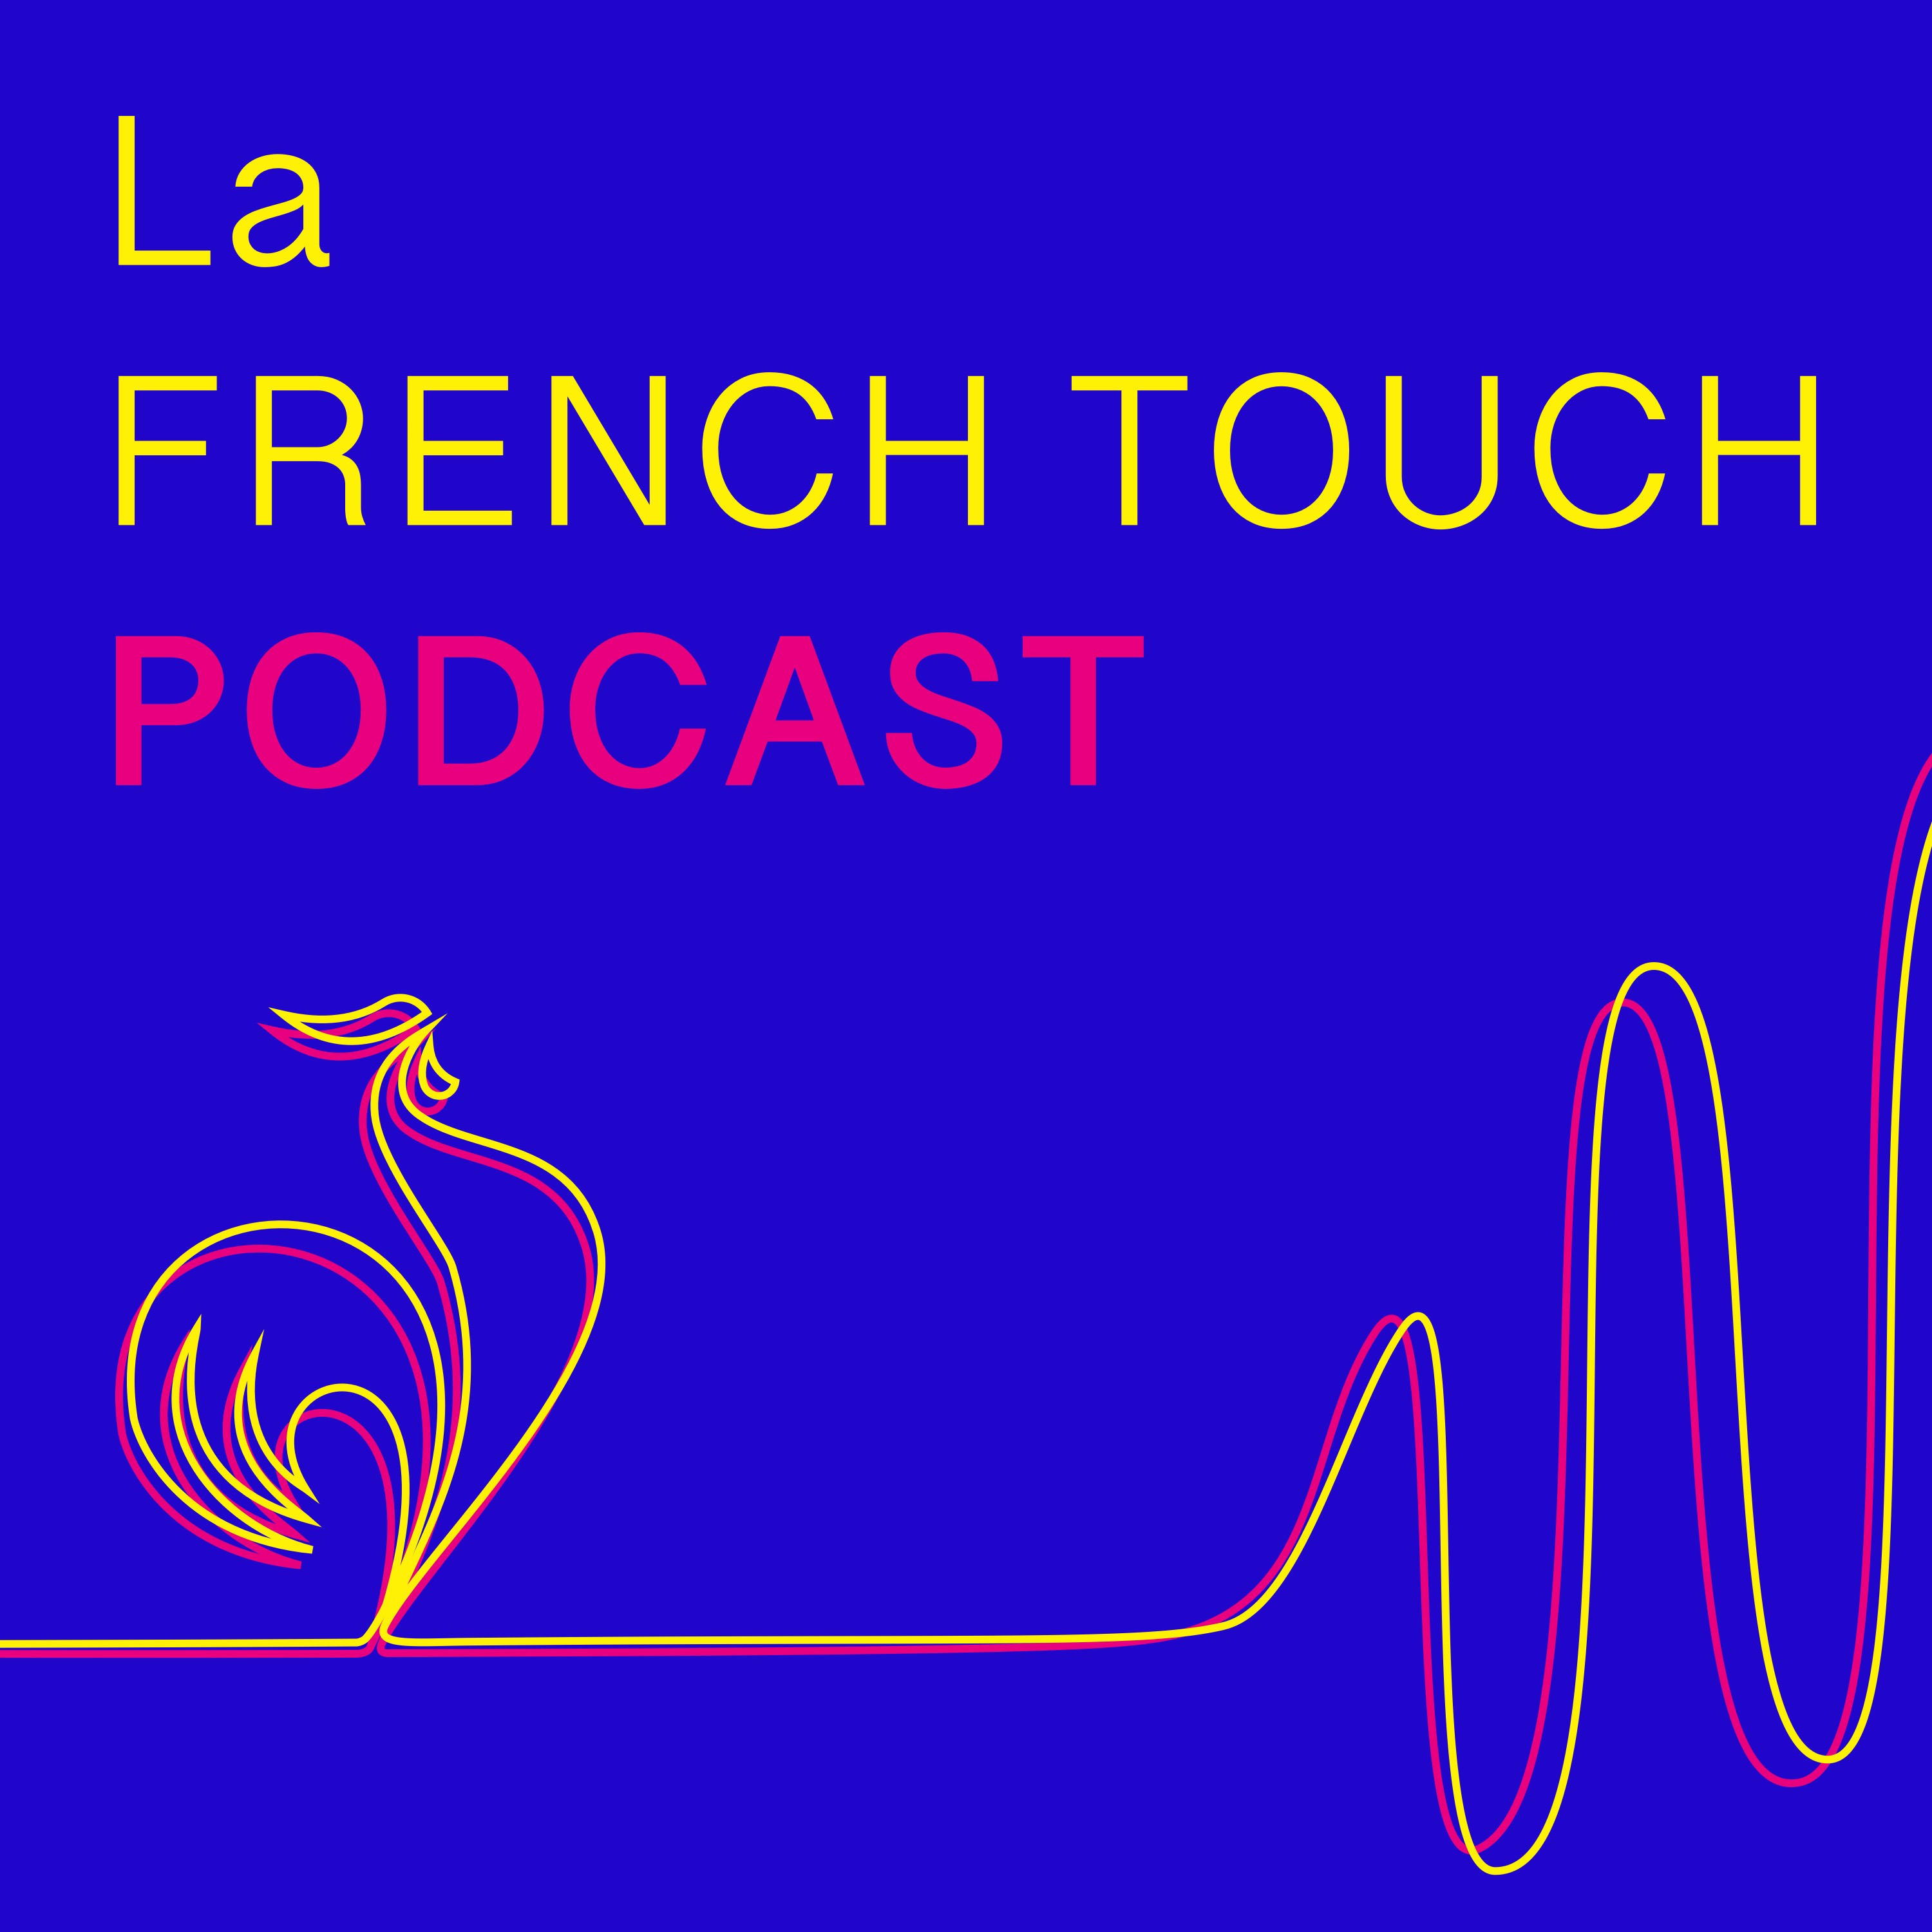 La french touch podcast